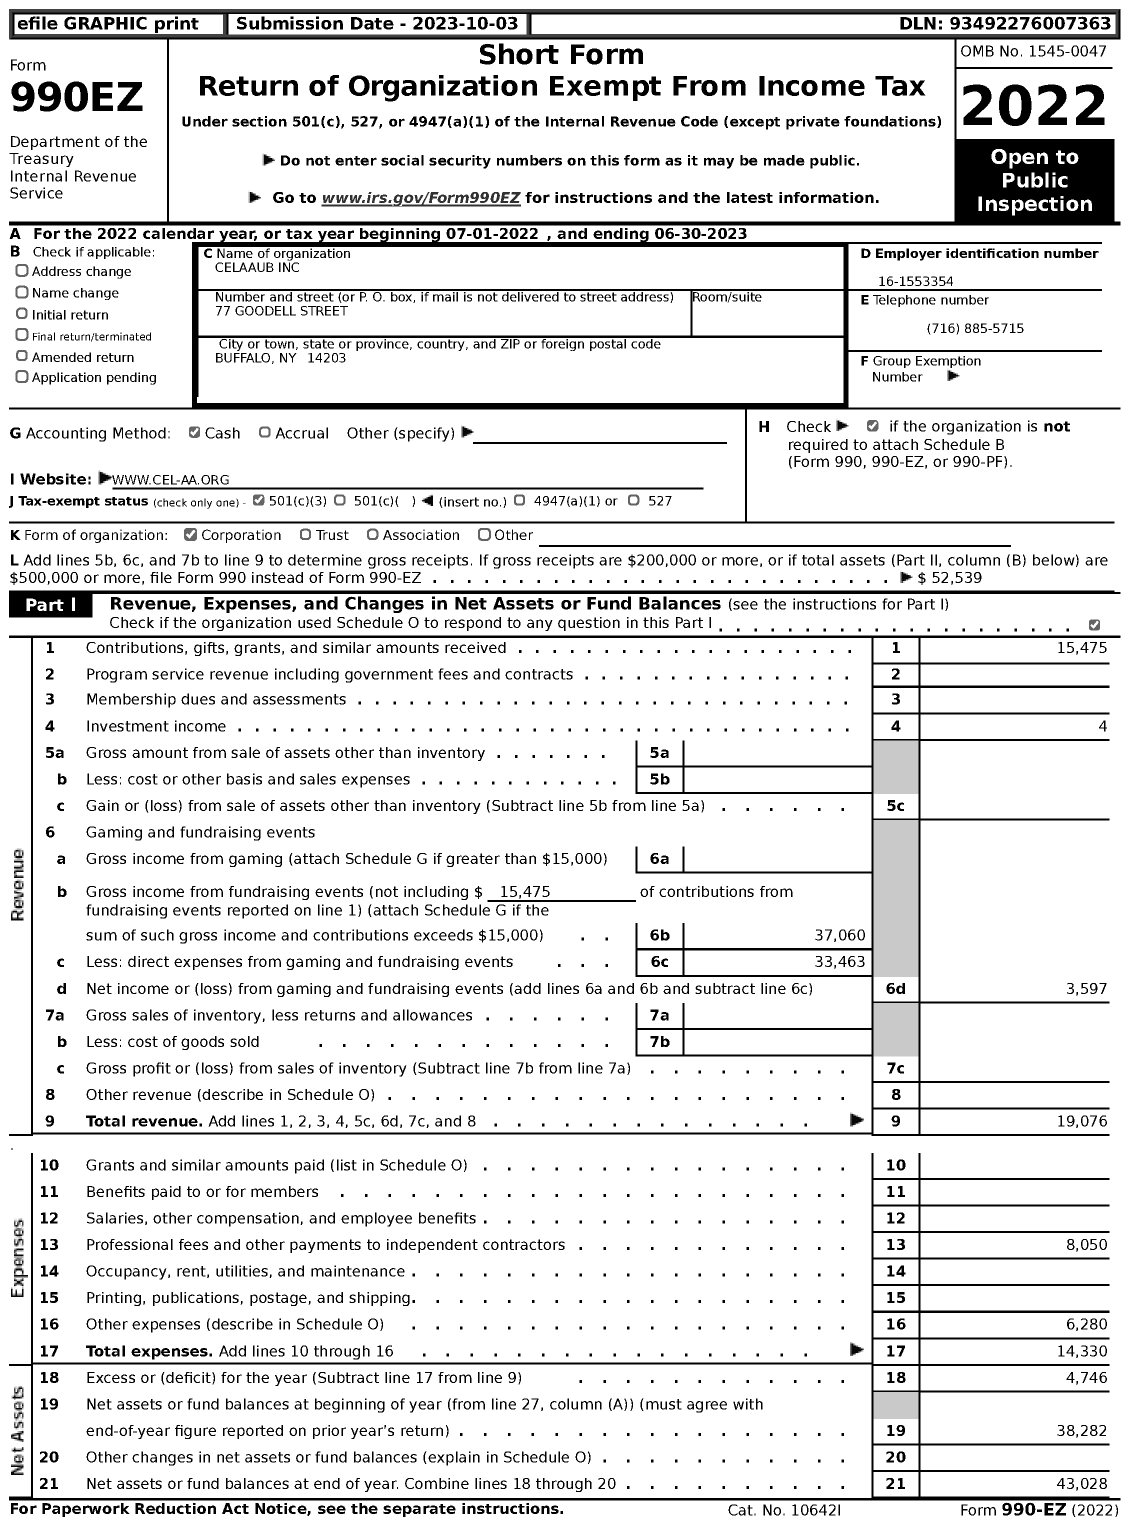 Image of first page of 2022 Form 990EZ for Celaaub